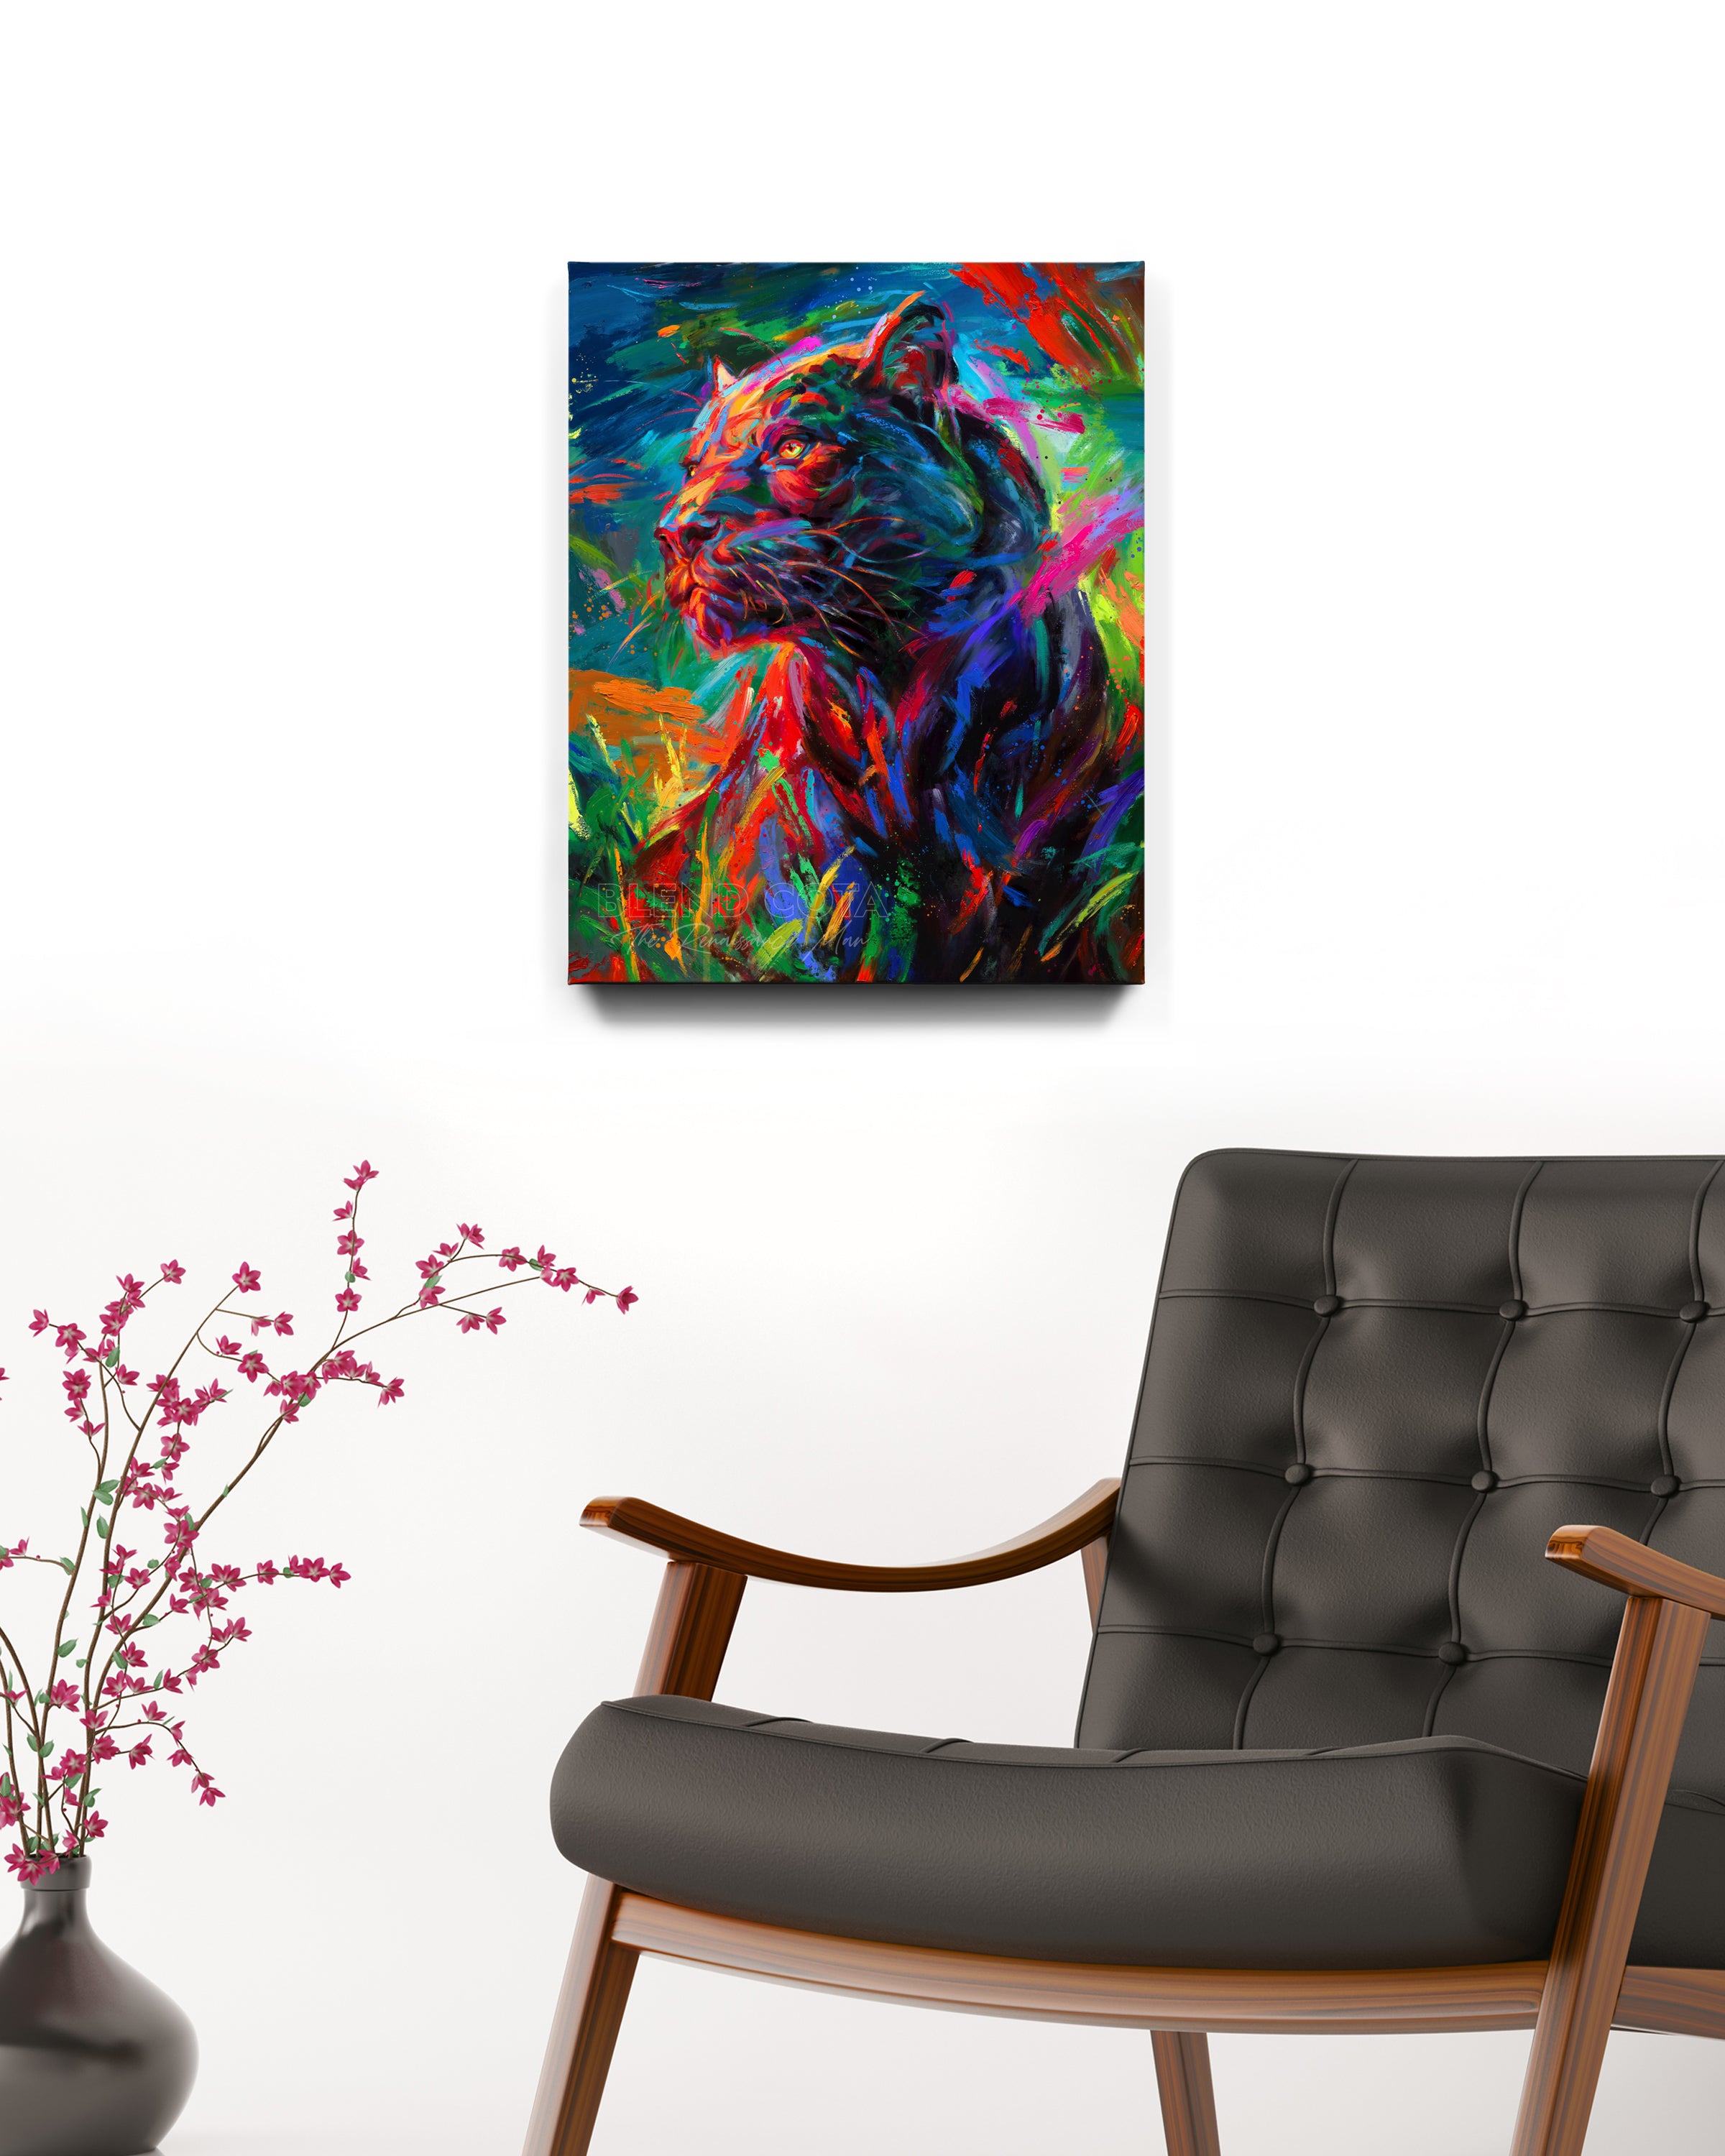 Art print on paper cardstock of the black panther stalking its prey through the long night painted with colorful brushstrokes in an expressionistic style in a room setting.